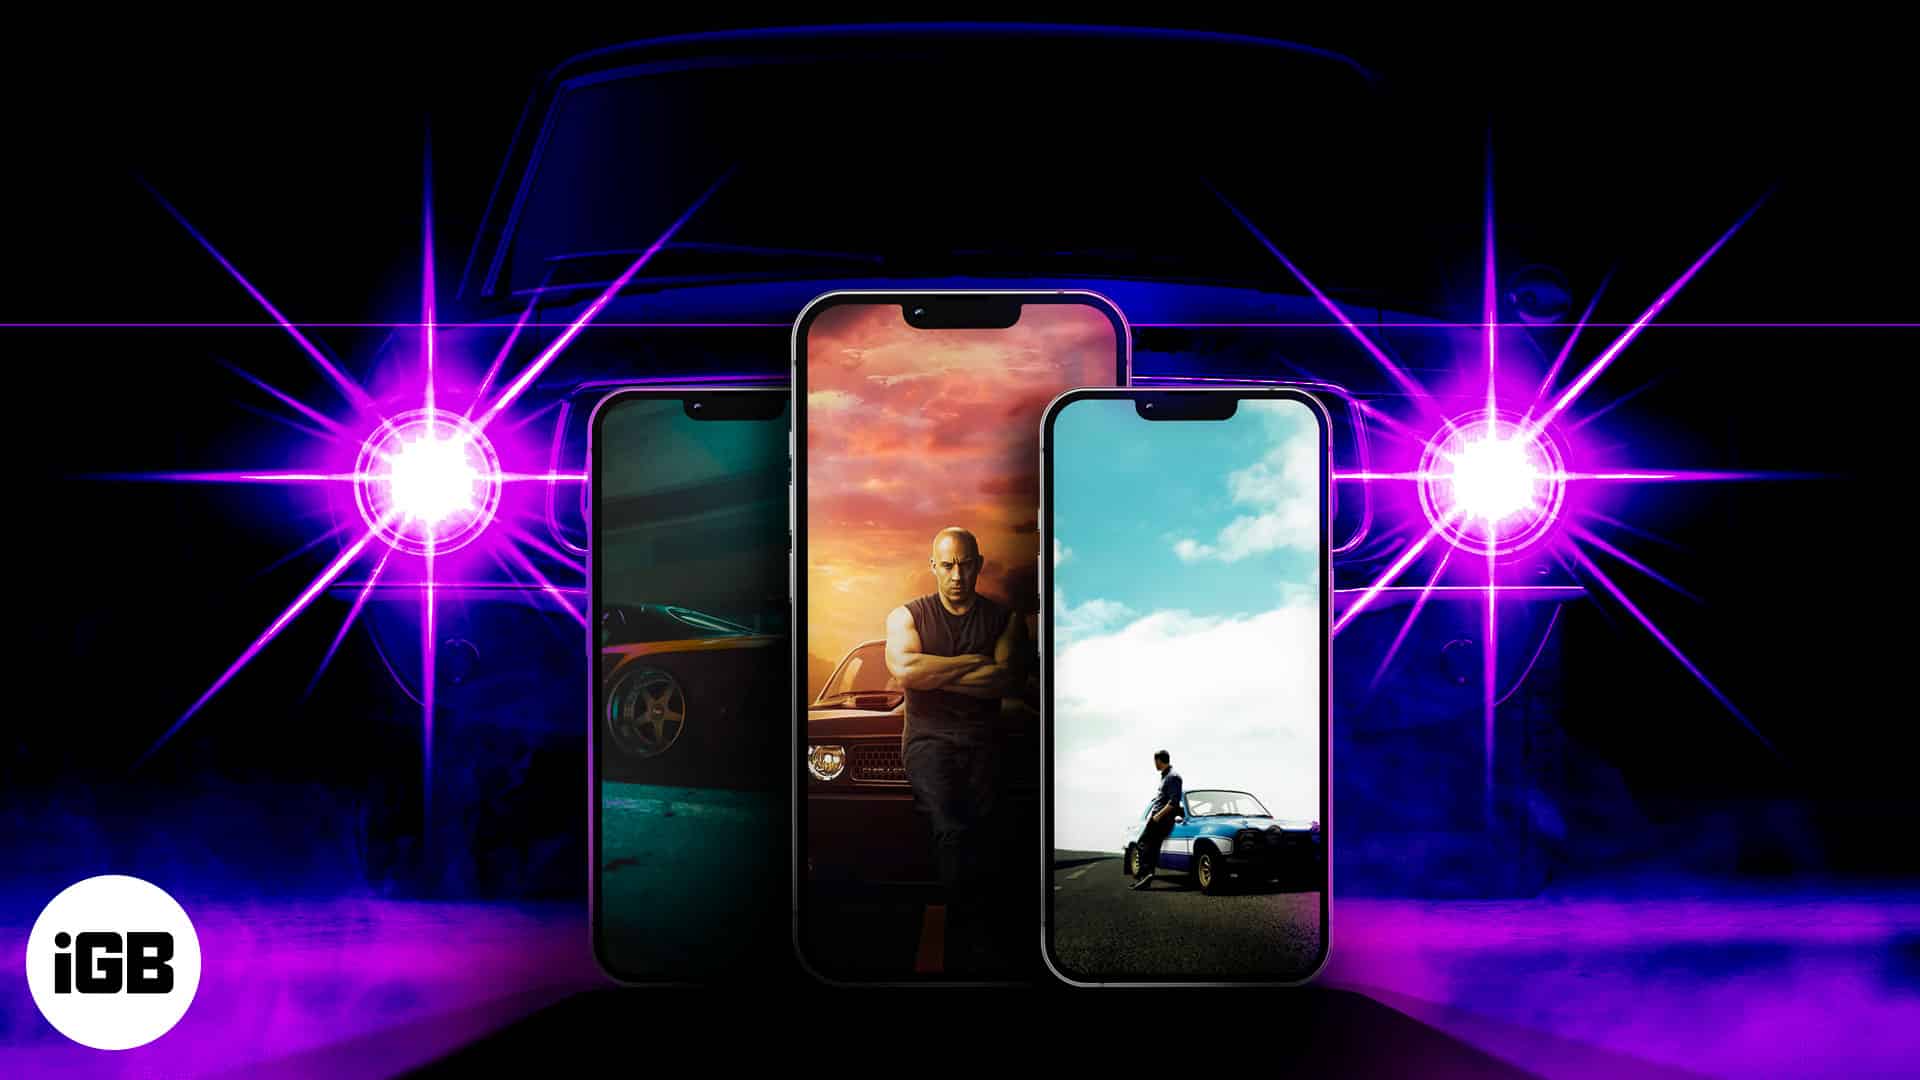 Fast furious hd wallpapers for iphone